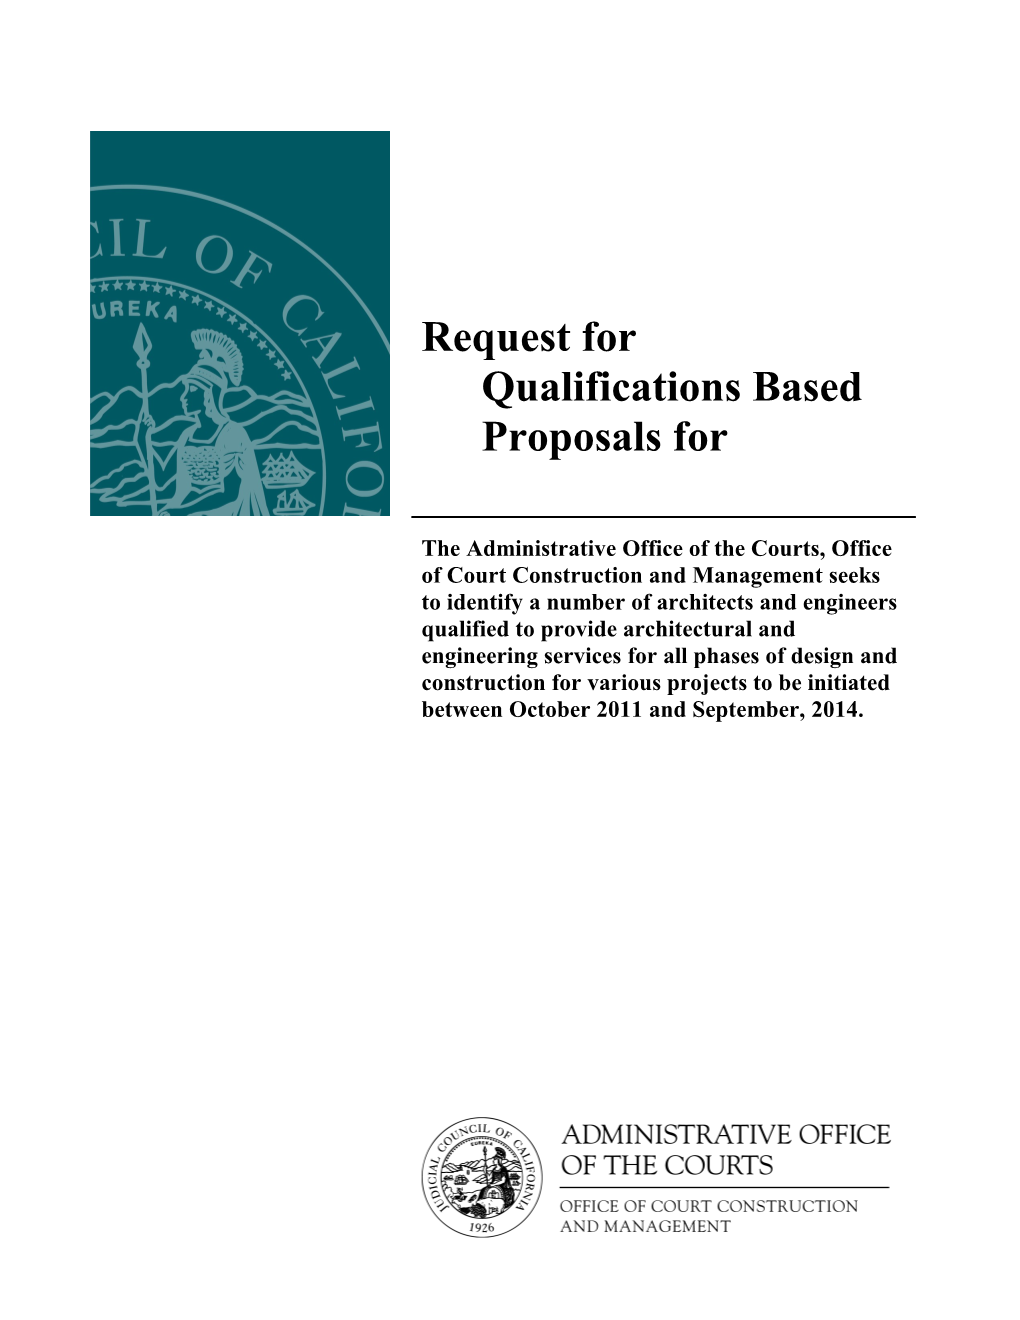 Request for Qualifications Based Proposals For